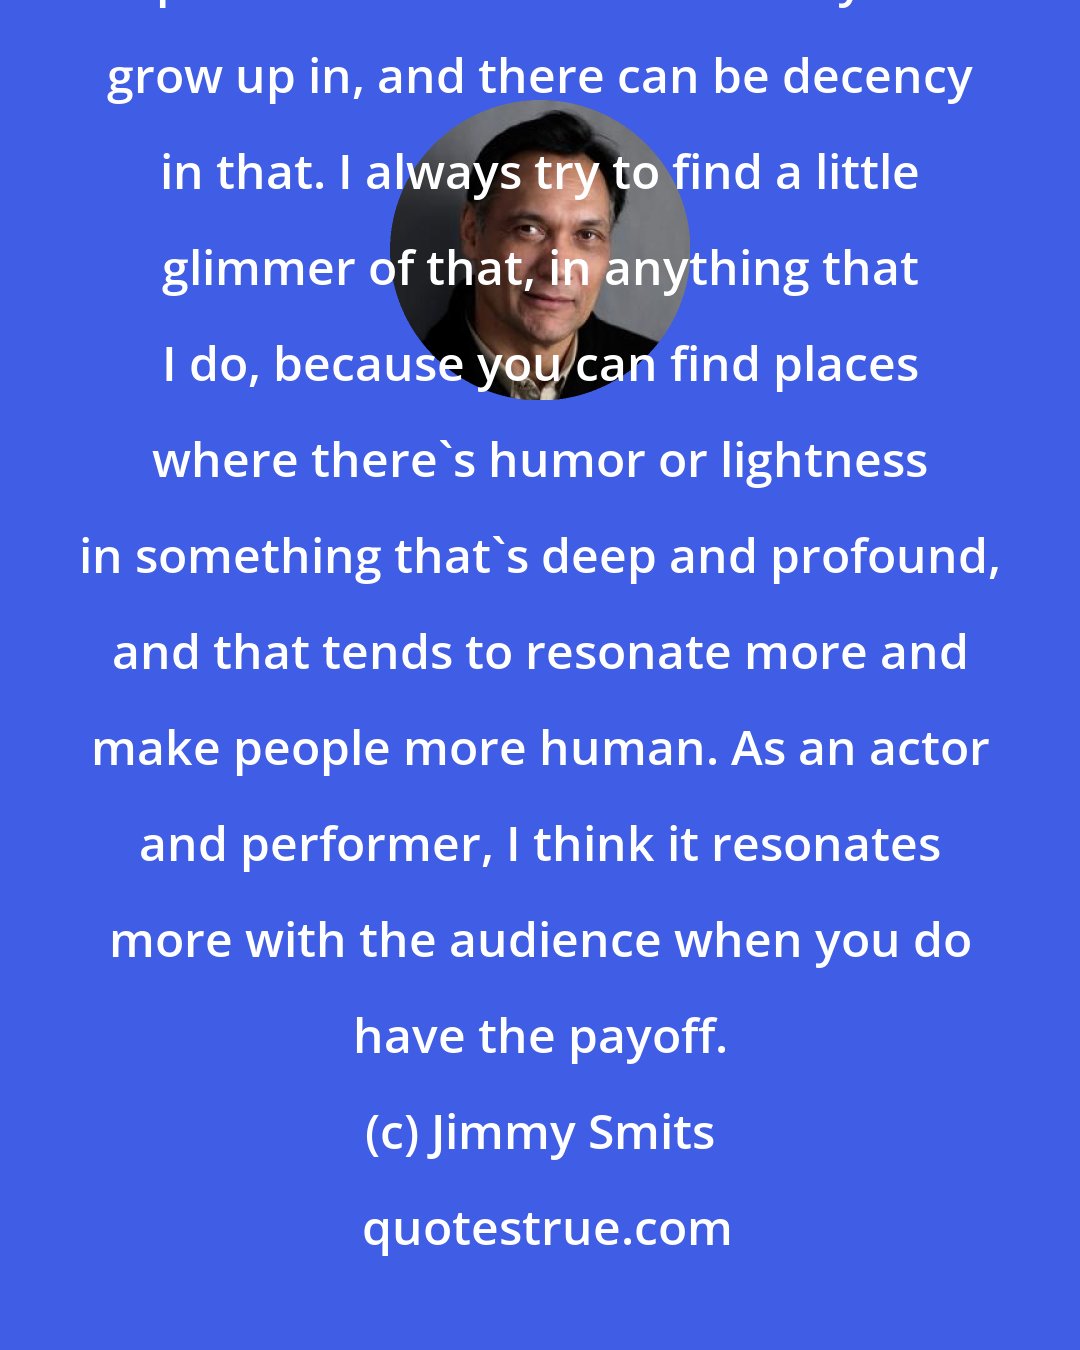 Jimmy Smits: People don't walk around thinking of themselves as bad people. You're part of the environment that you grow up in, and there can be decency in that. I always try to find a little glimmer of that, in anything that I do, because you can find places where there's humor or lightness in something that's deep and profound, and that tends to resonate more and make people more human. As an actor and performer, I think it resonates more with the audience when you do have the payoff.